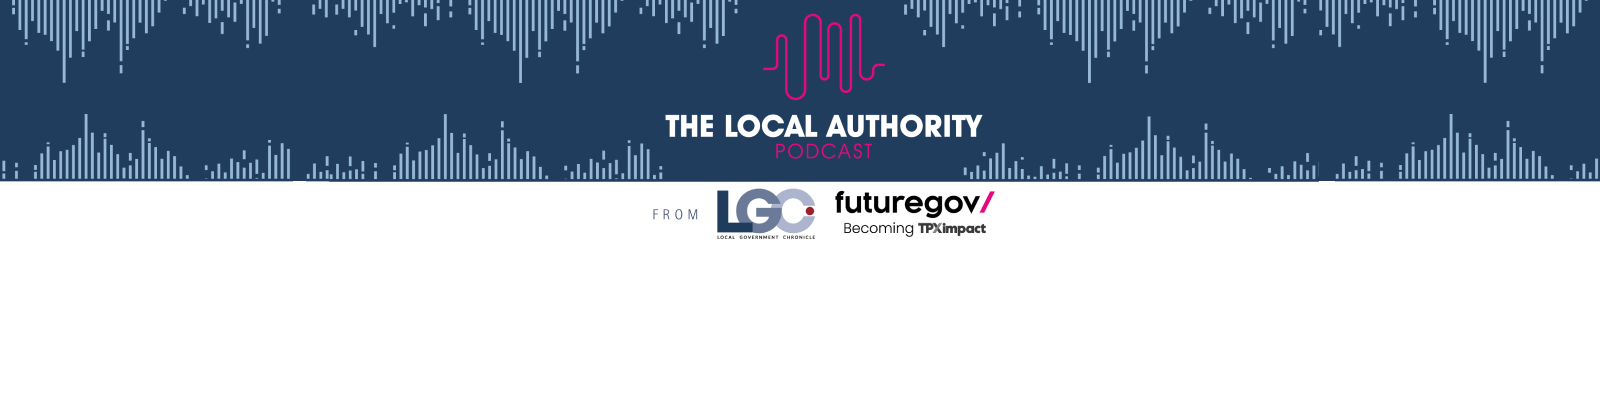 The Local Authority Podcast